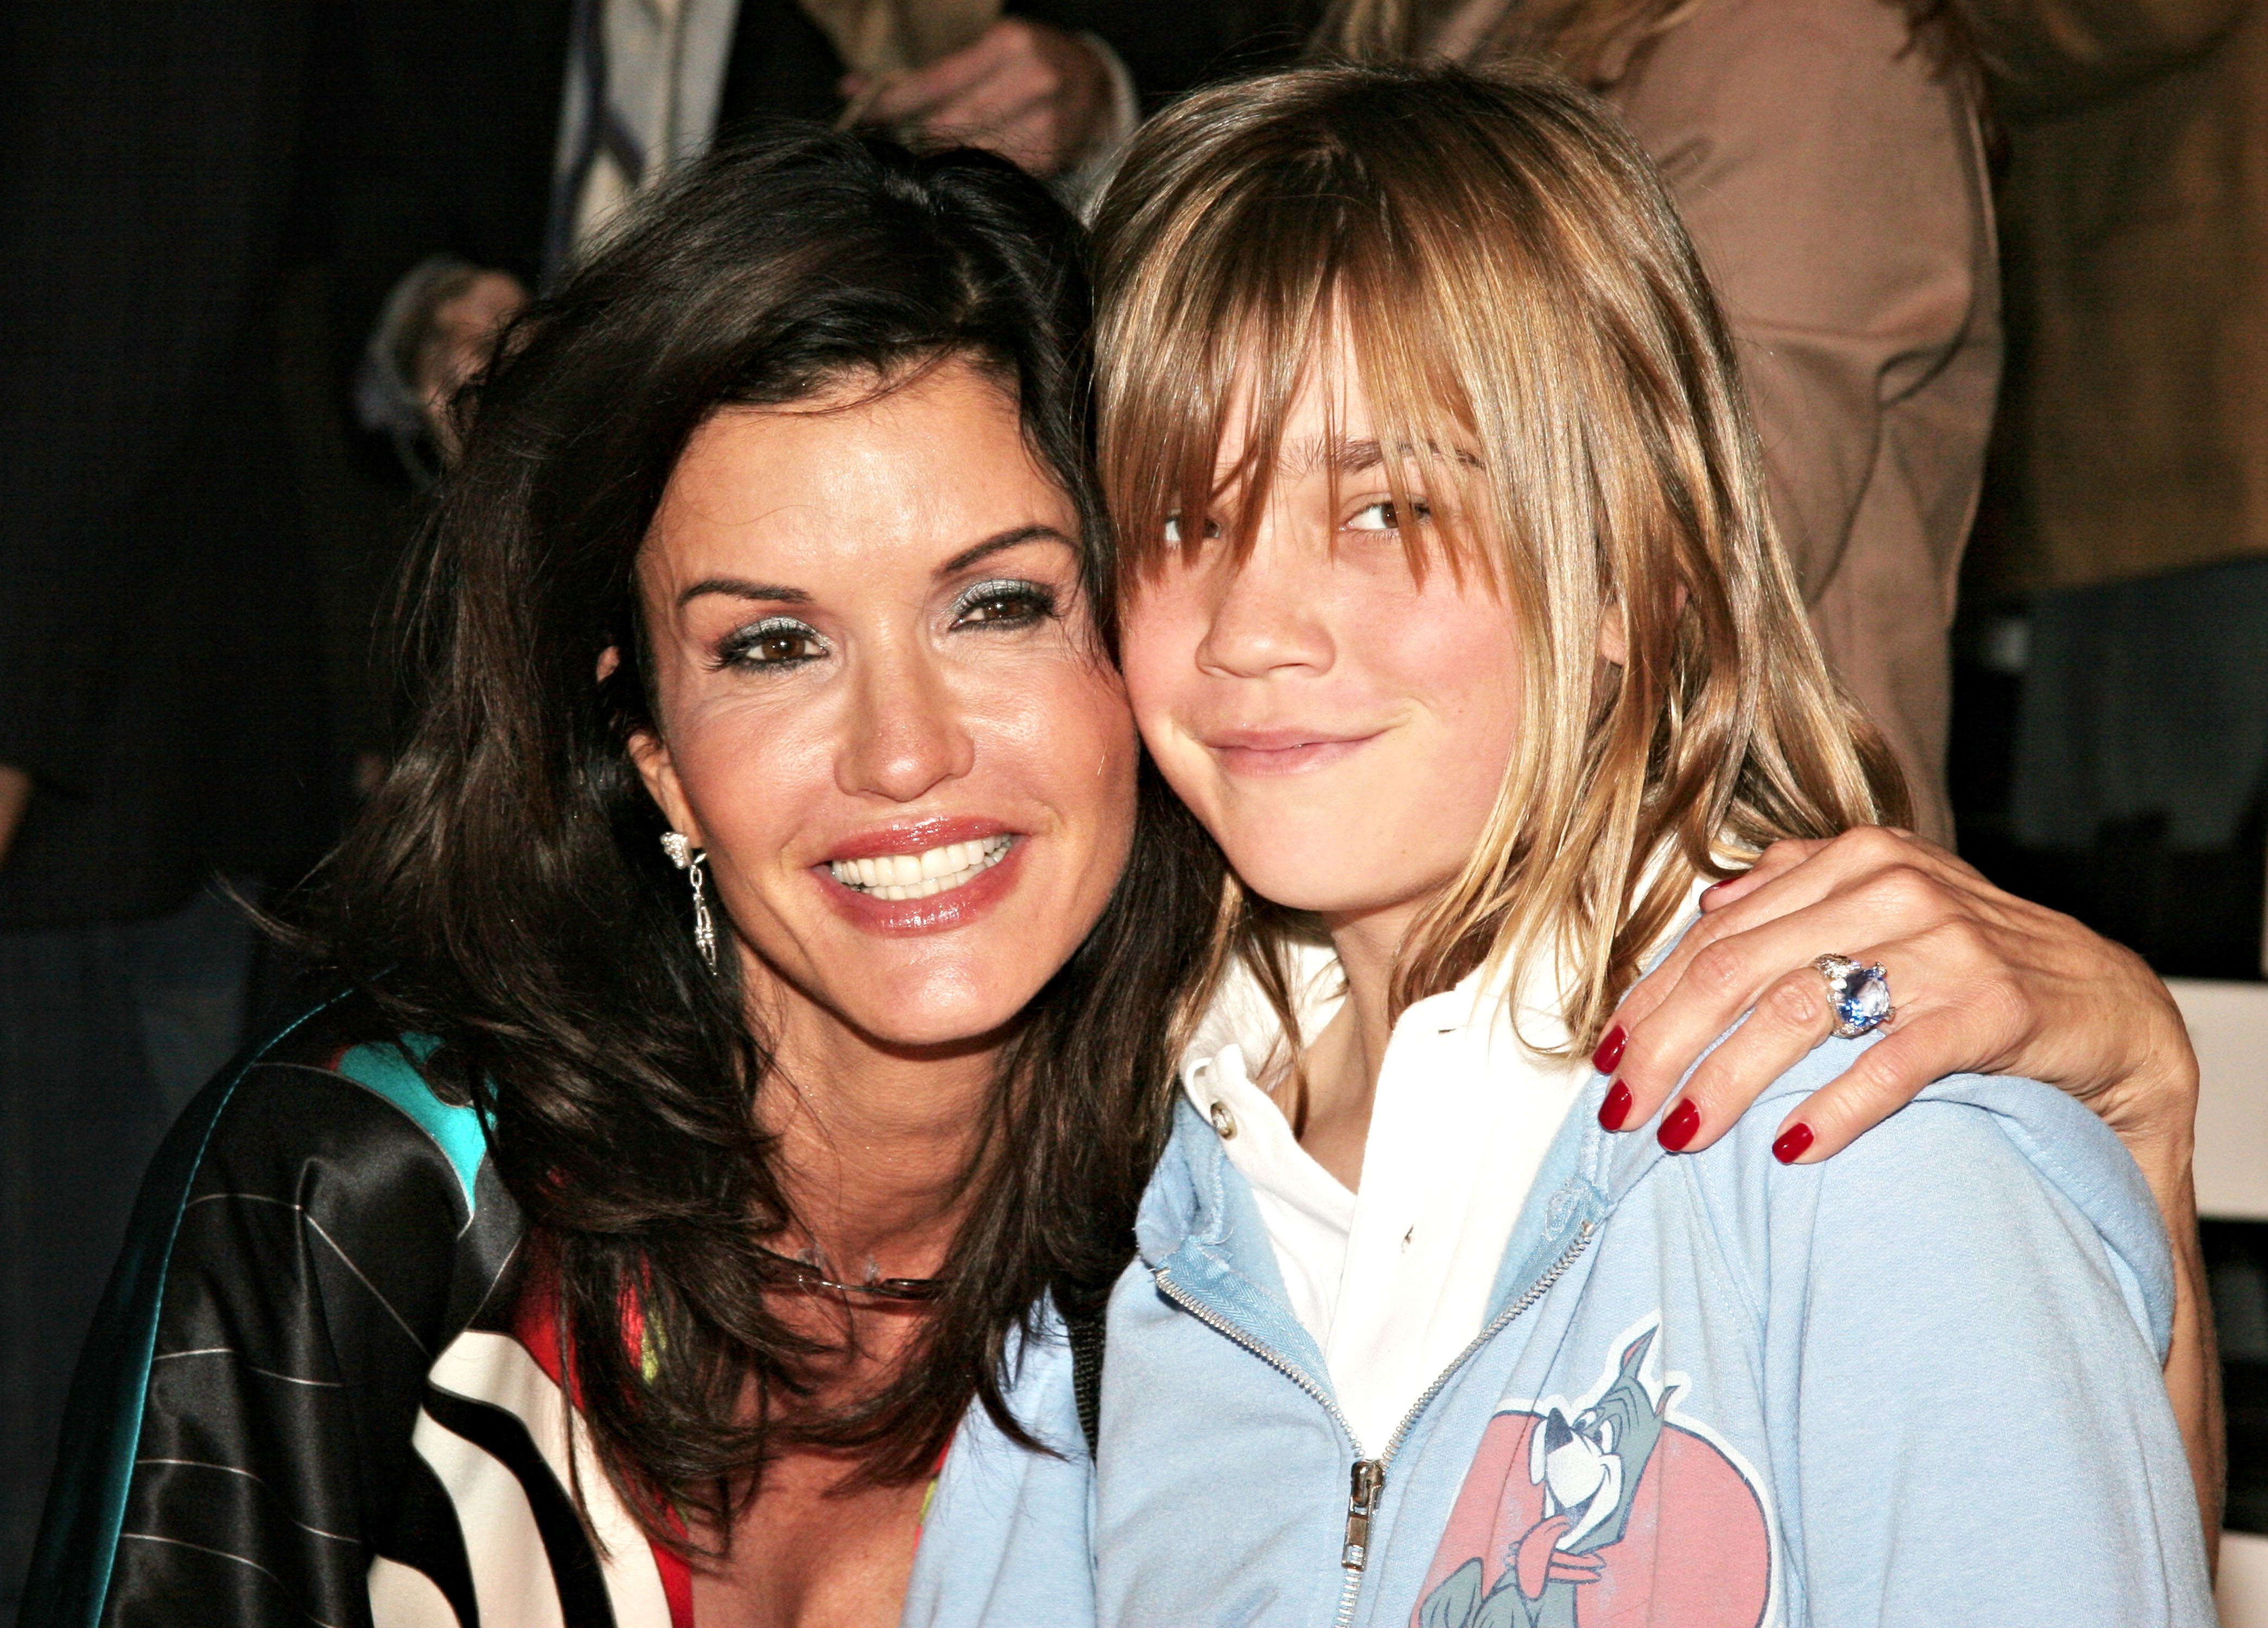 Model Janice Dickinson and Savannah at the Ashley Paige Spring 2006 show at Smashbox Studios on October 18, 2005 in Culver City, California. | Source: Getty Images